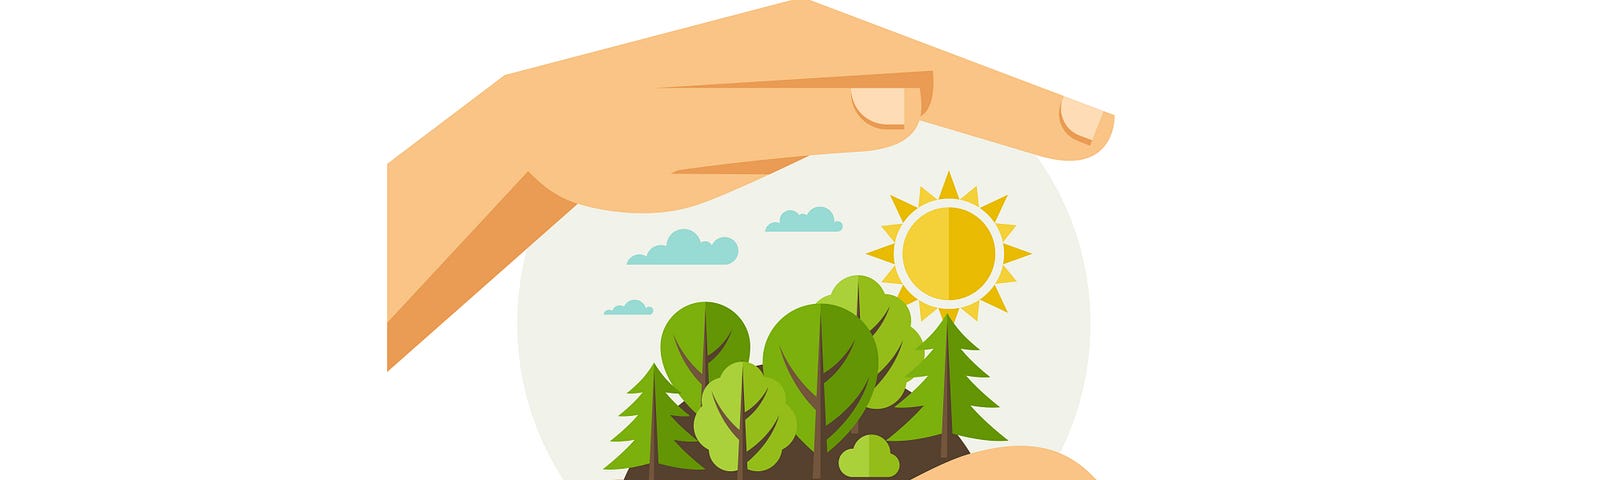 Illustration of a hand holding an ecosystem and the other hand above it to protect it